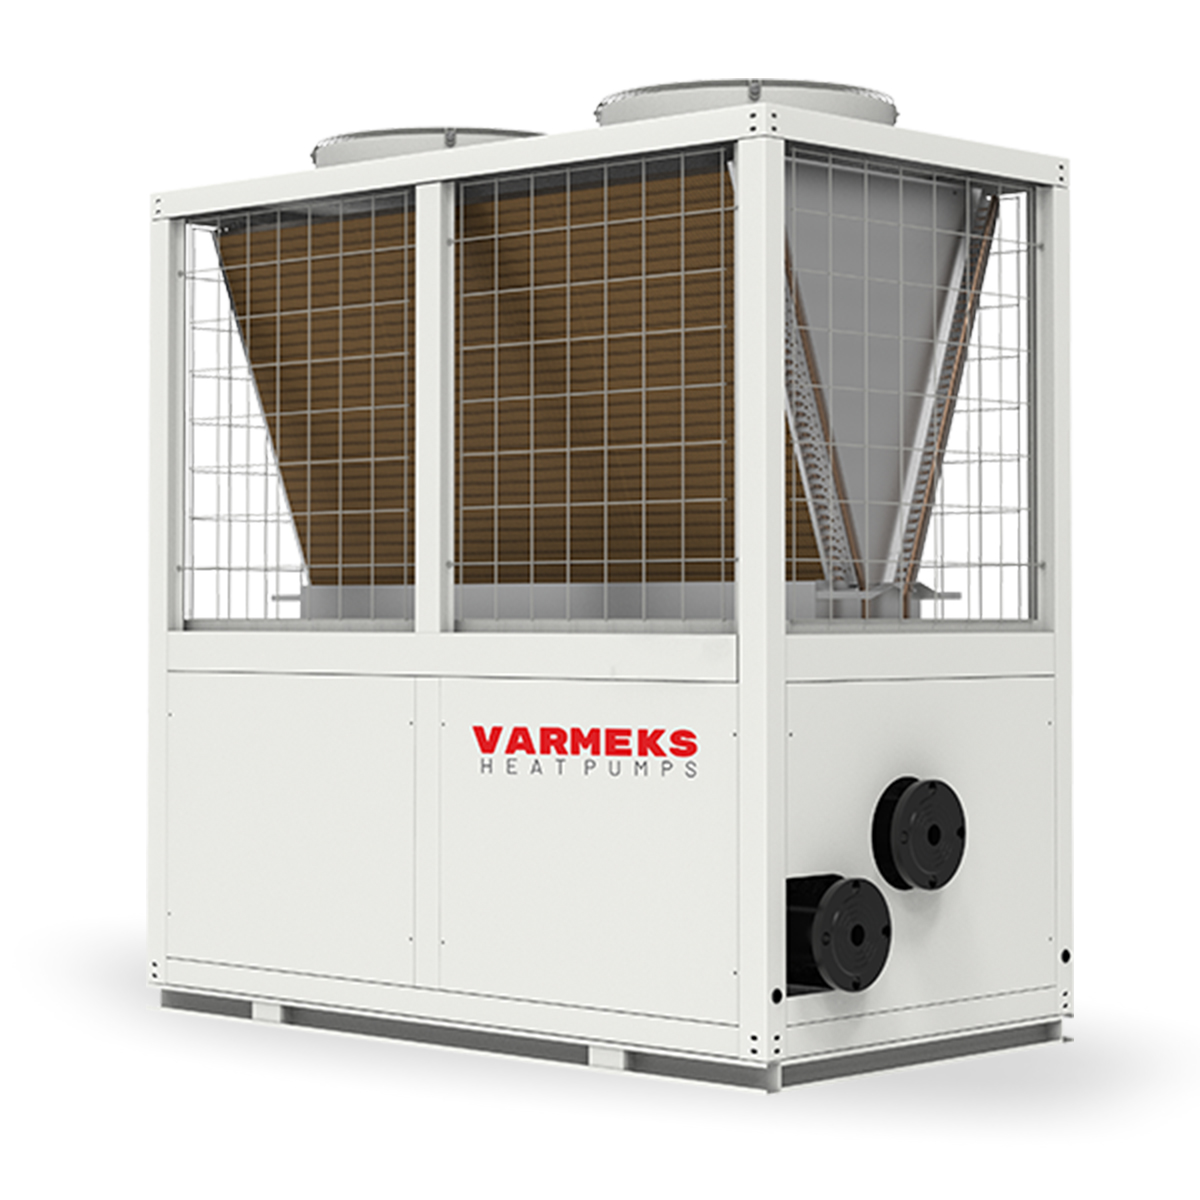 Varm Commercial Duo Series 144 kW